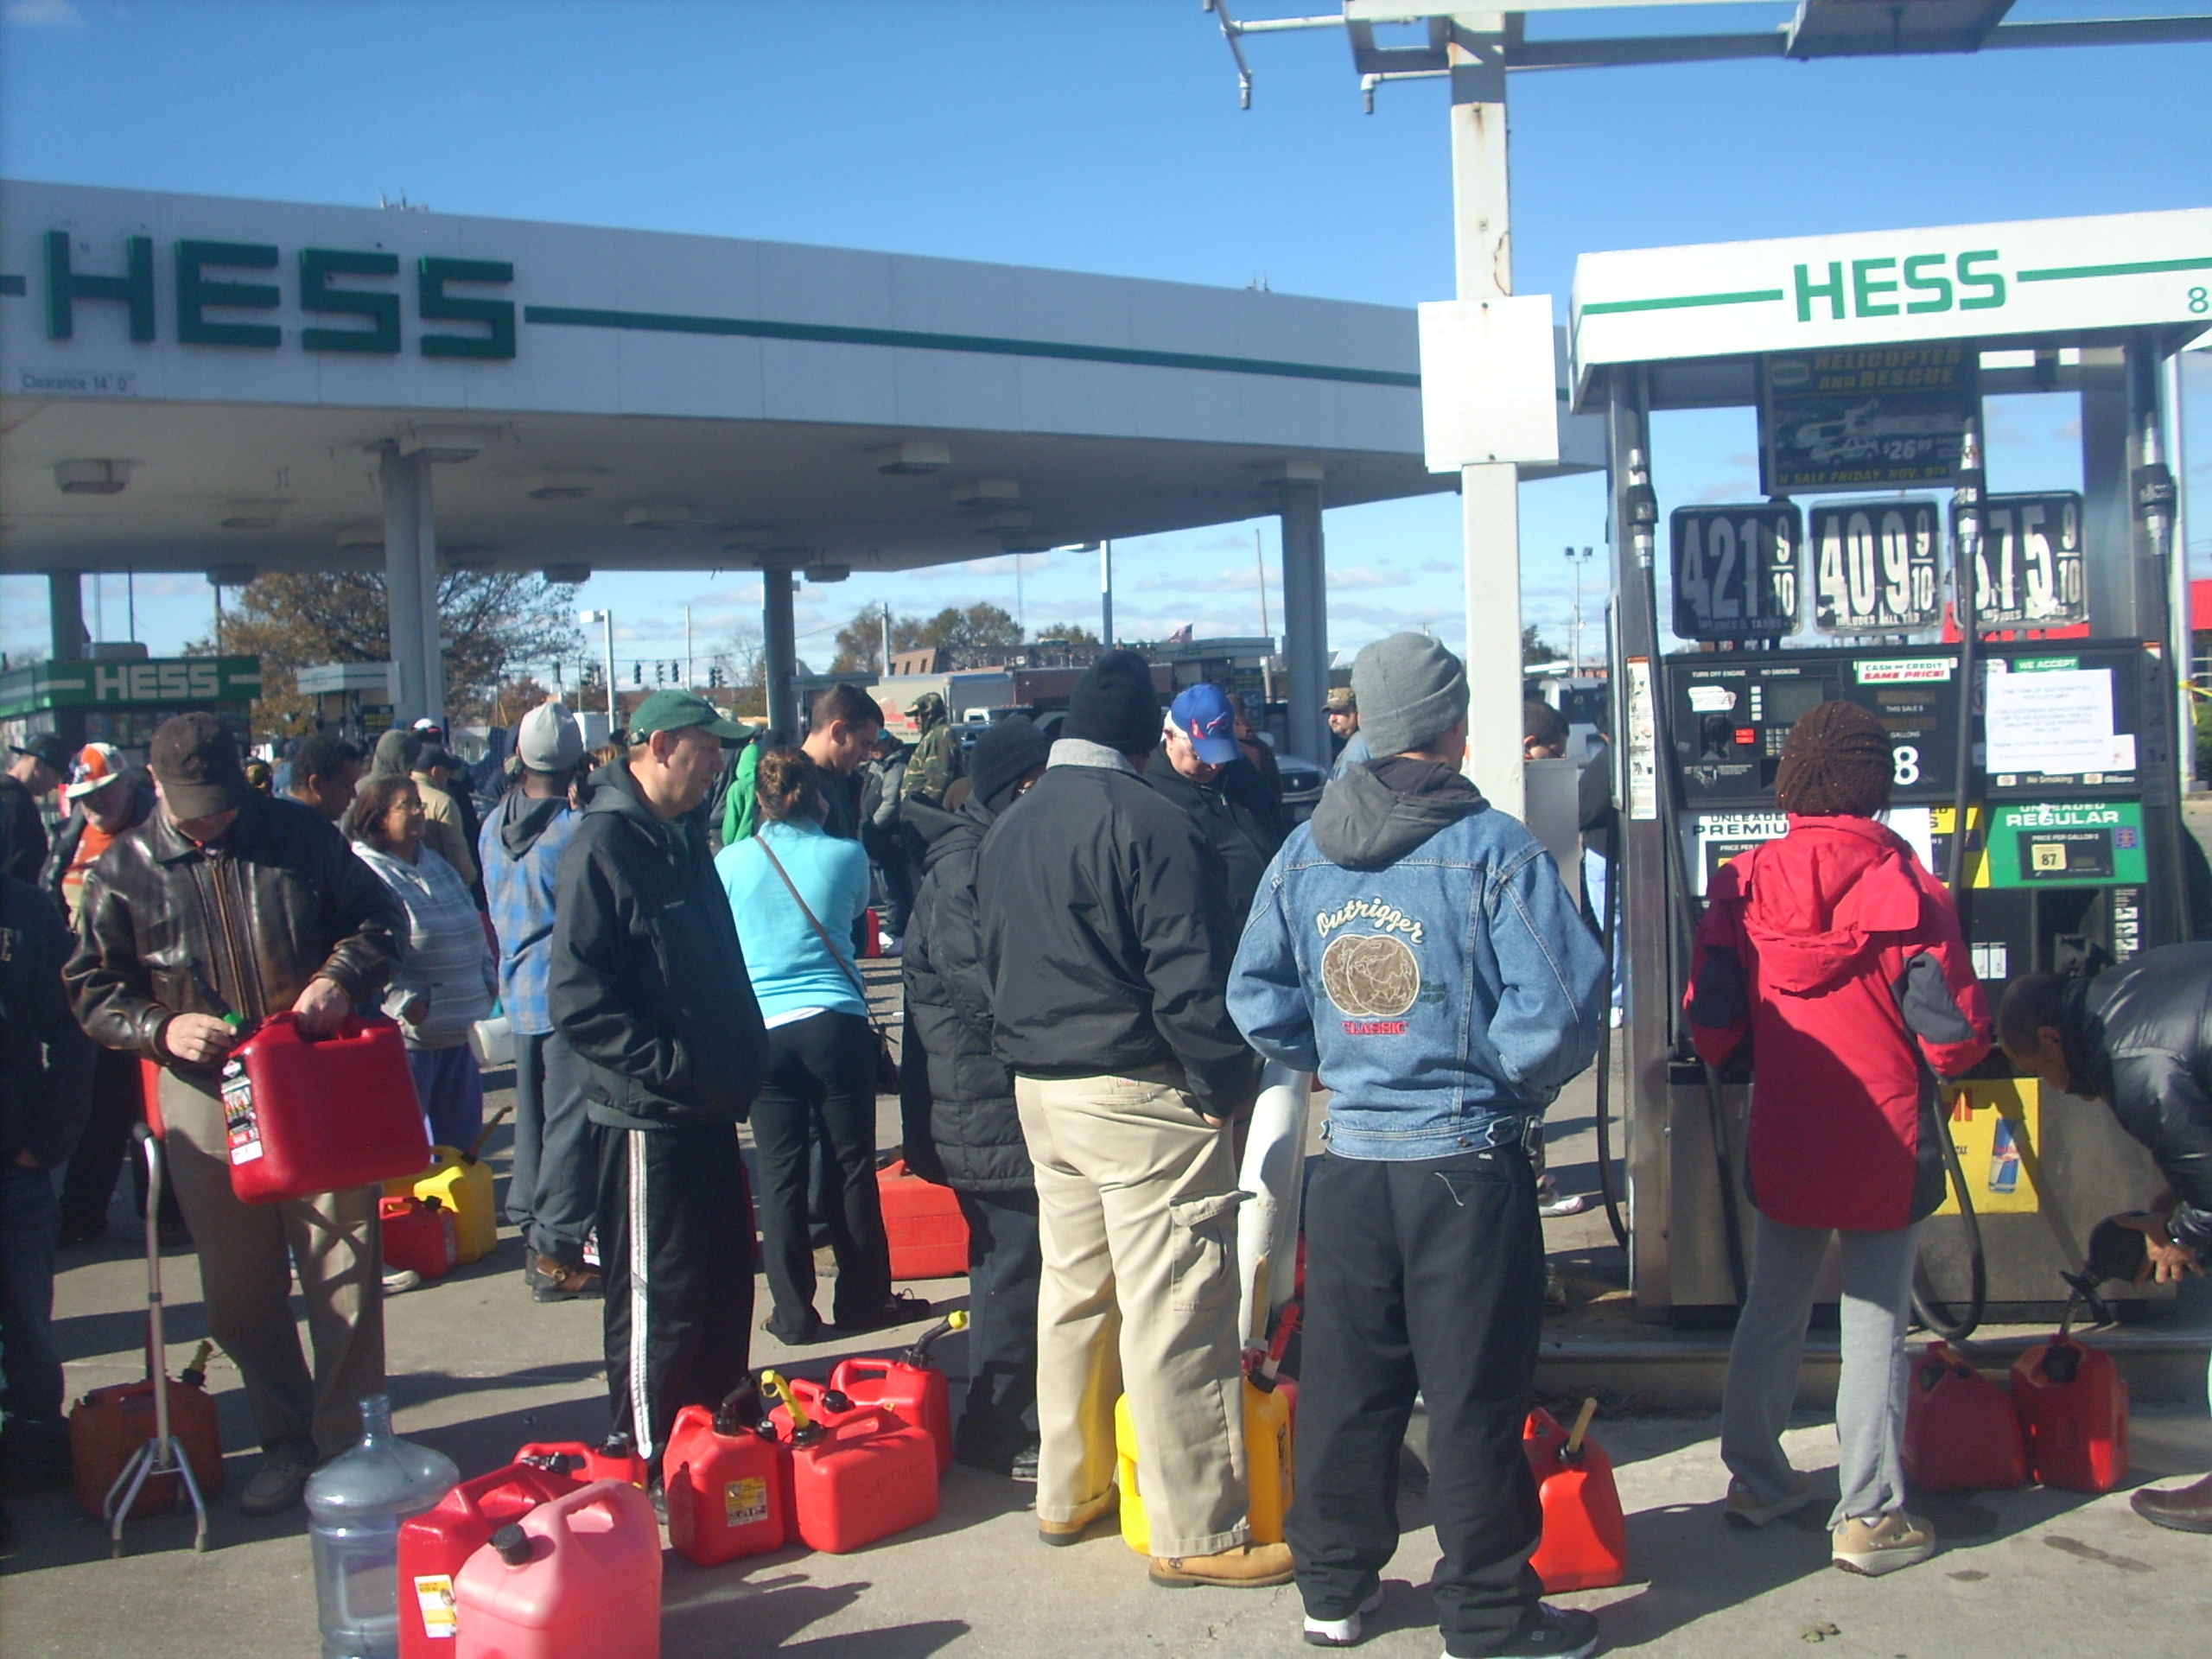 Walk-ups at a Hess gas station in Copiague Saturday, Nov. 3 filled cans and containers of all shapes and dimensions with fuel for their cars and generators, including buckets, water jugs and antifreeze bottles. (Christopher Twarowski/Long Island Press)